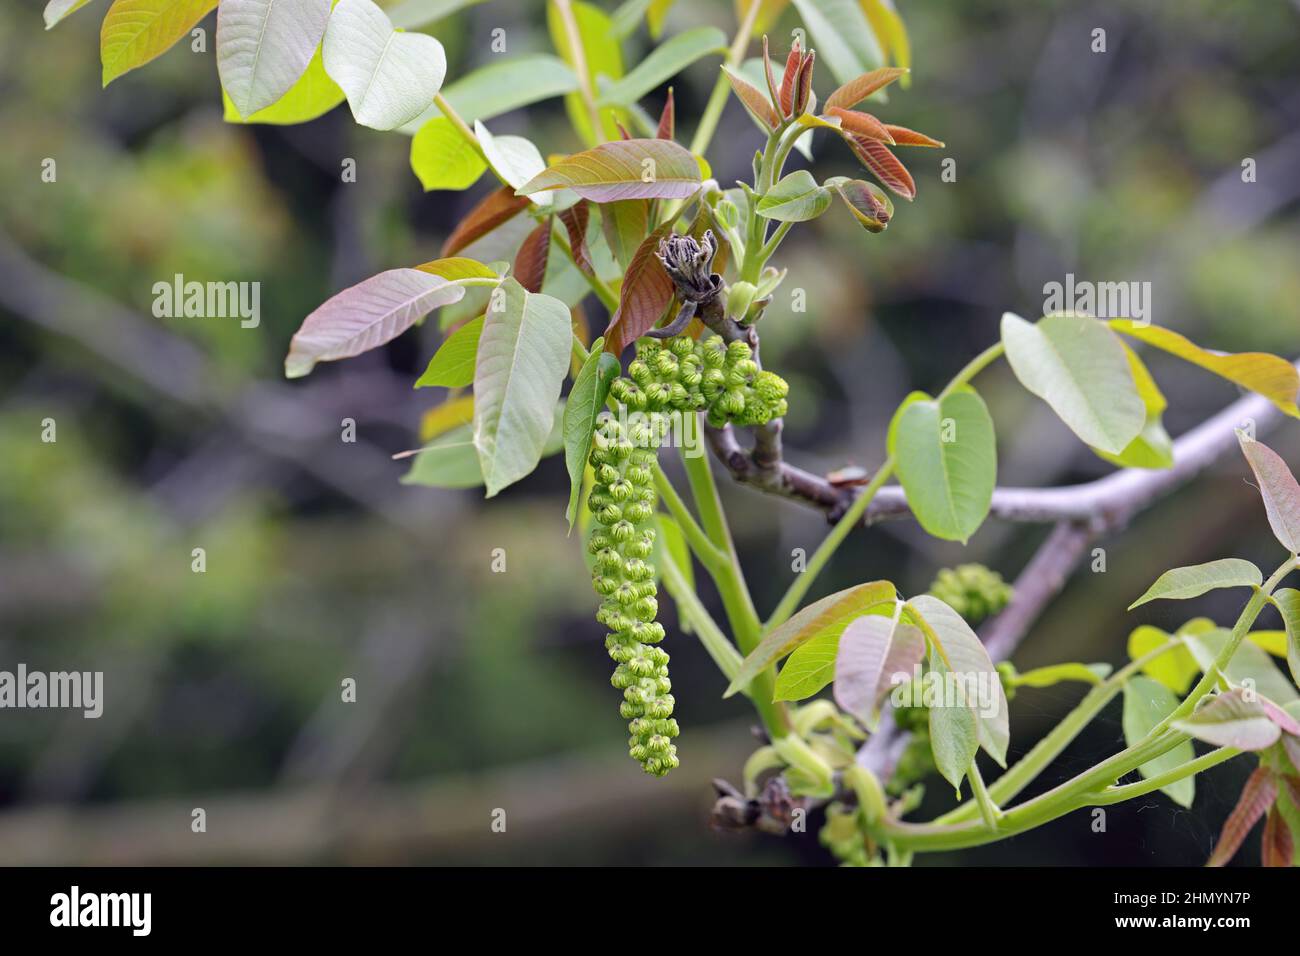 Walnut tree in blossom, male flowers on branches. Early spring. Stock Photo